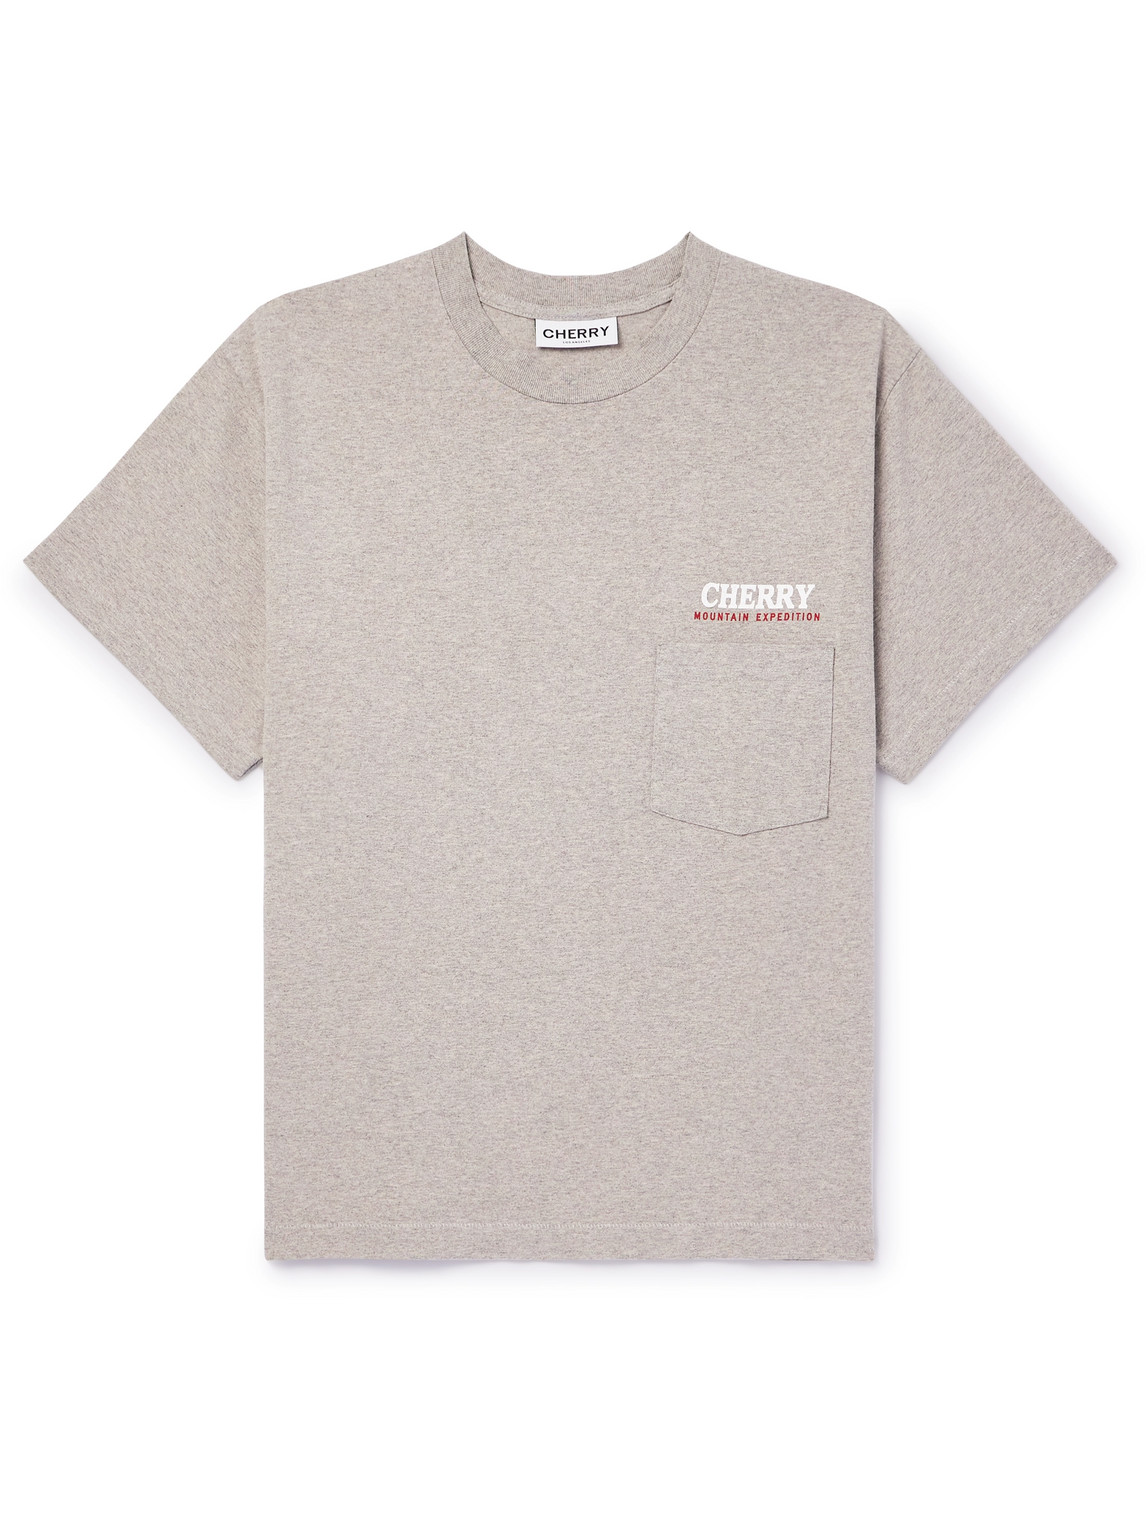 Cherry Los Angeles Mountain Expedition Garment-dyed Logo-print Cotton-jersey T-shirt In Neutrals